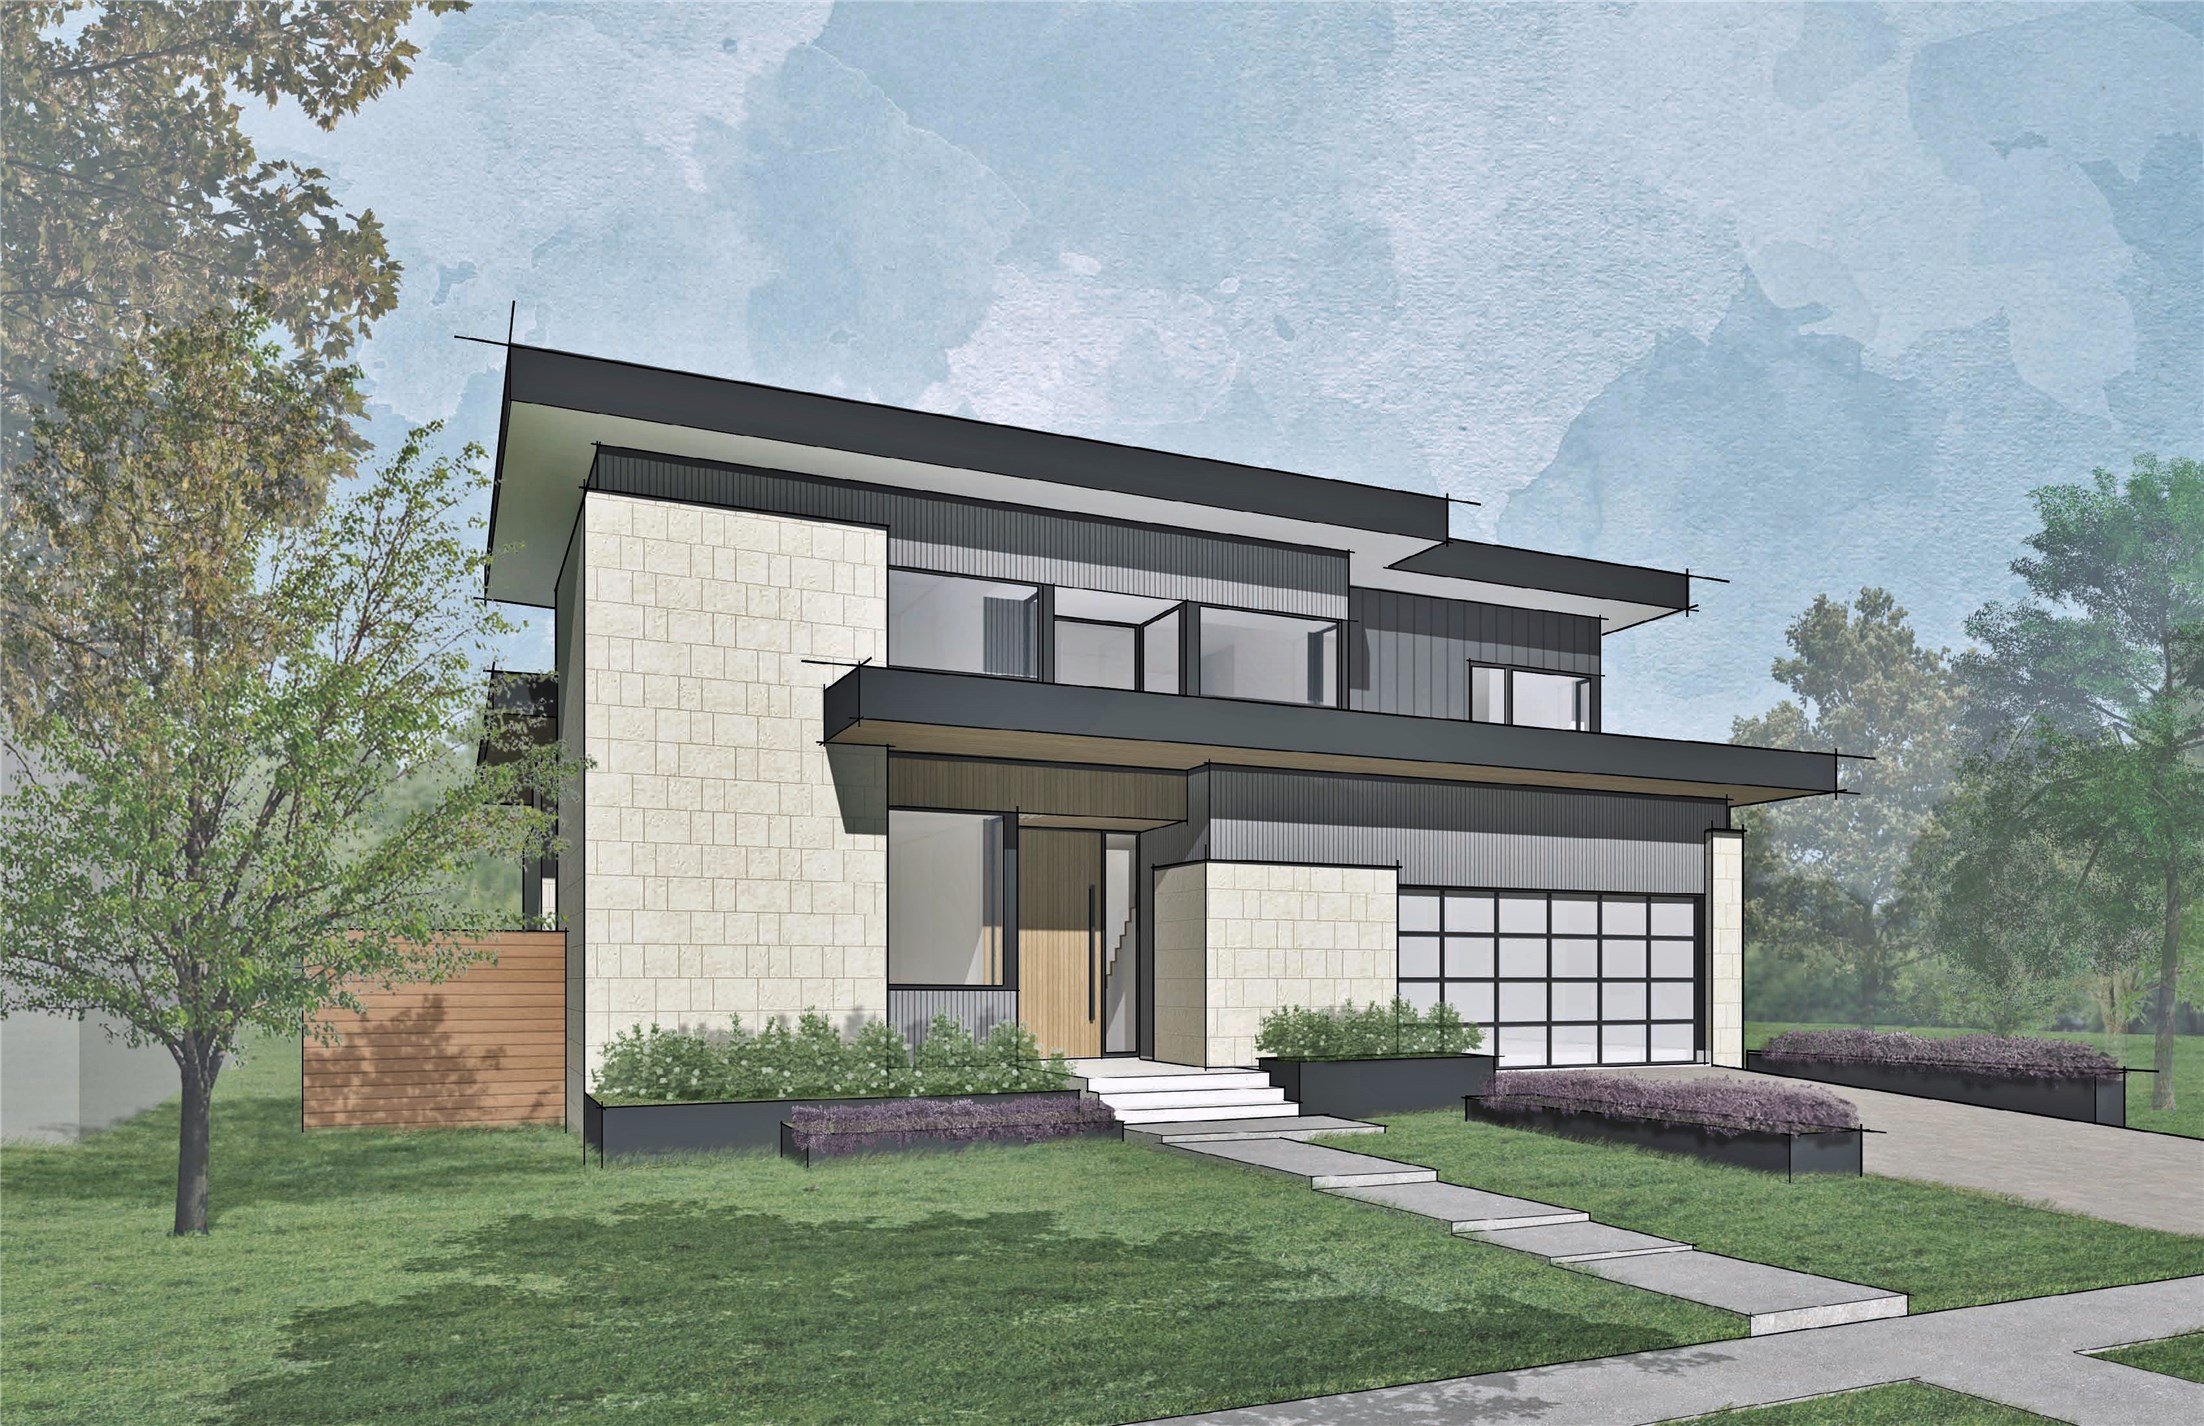 Future project by Yigal Kass with Crestview Homes, LLC.